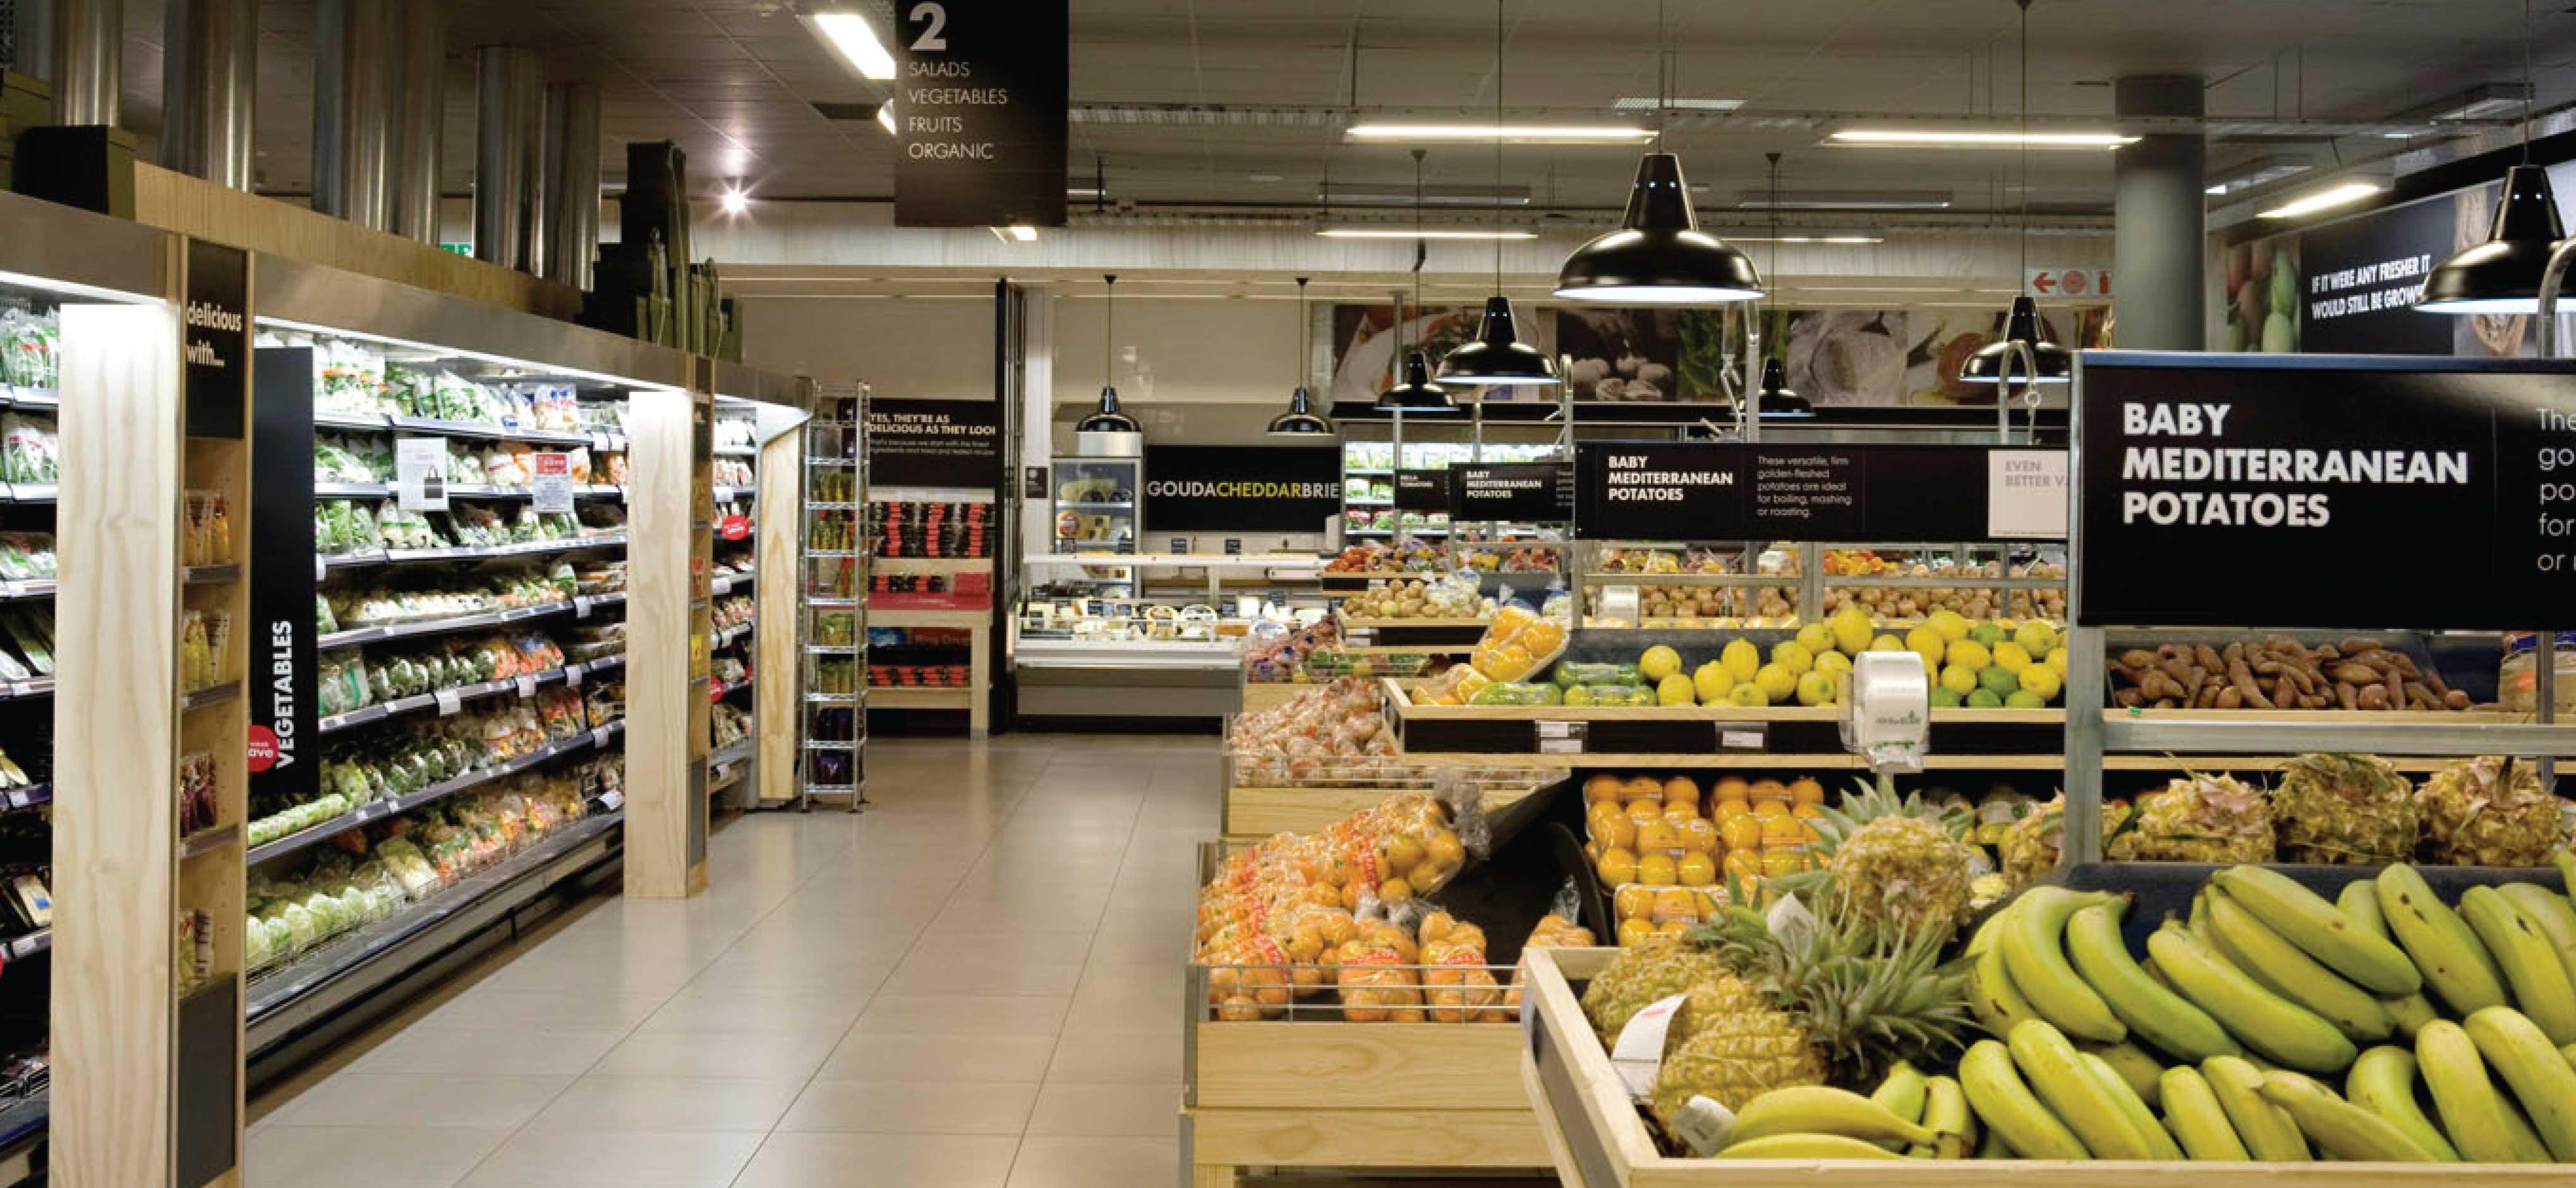 Future supermarket and grocery store ideas, innovation and trends. A